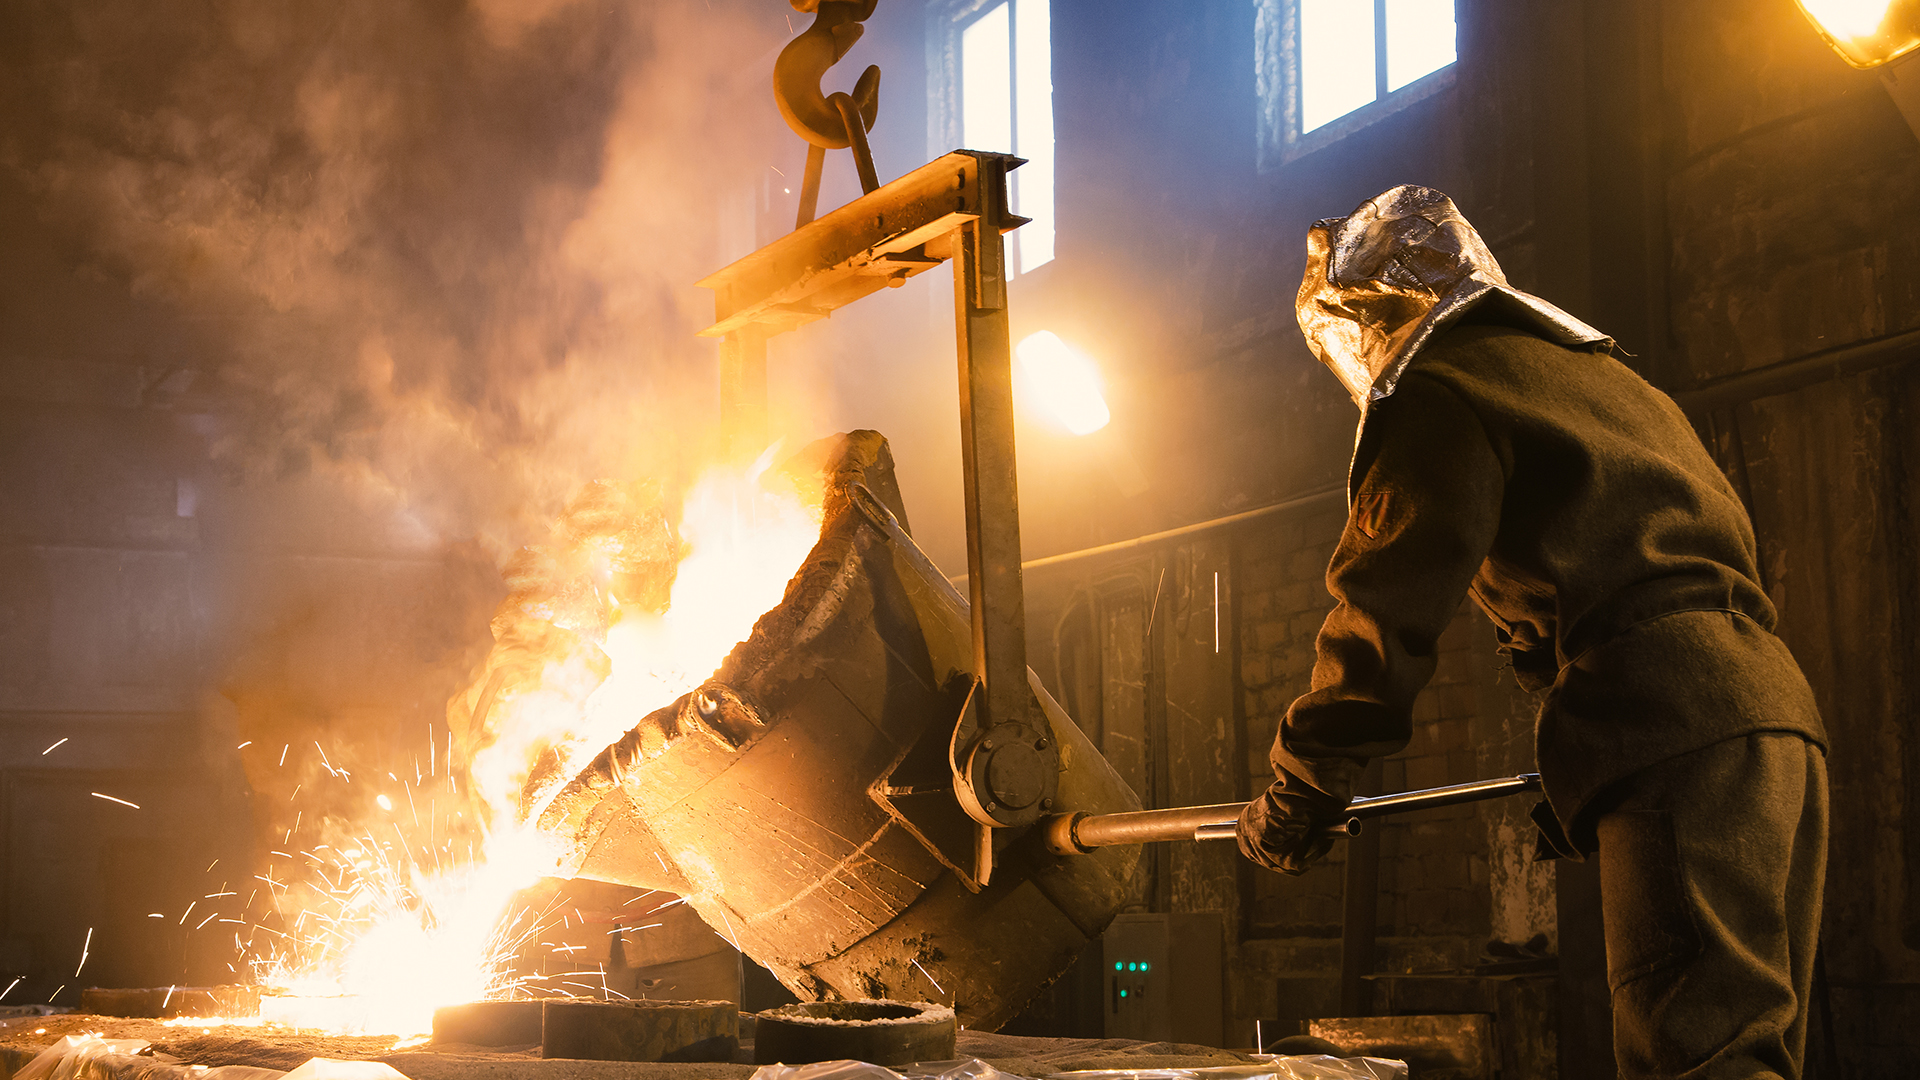 Foundry worker protection